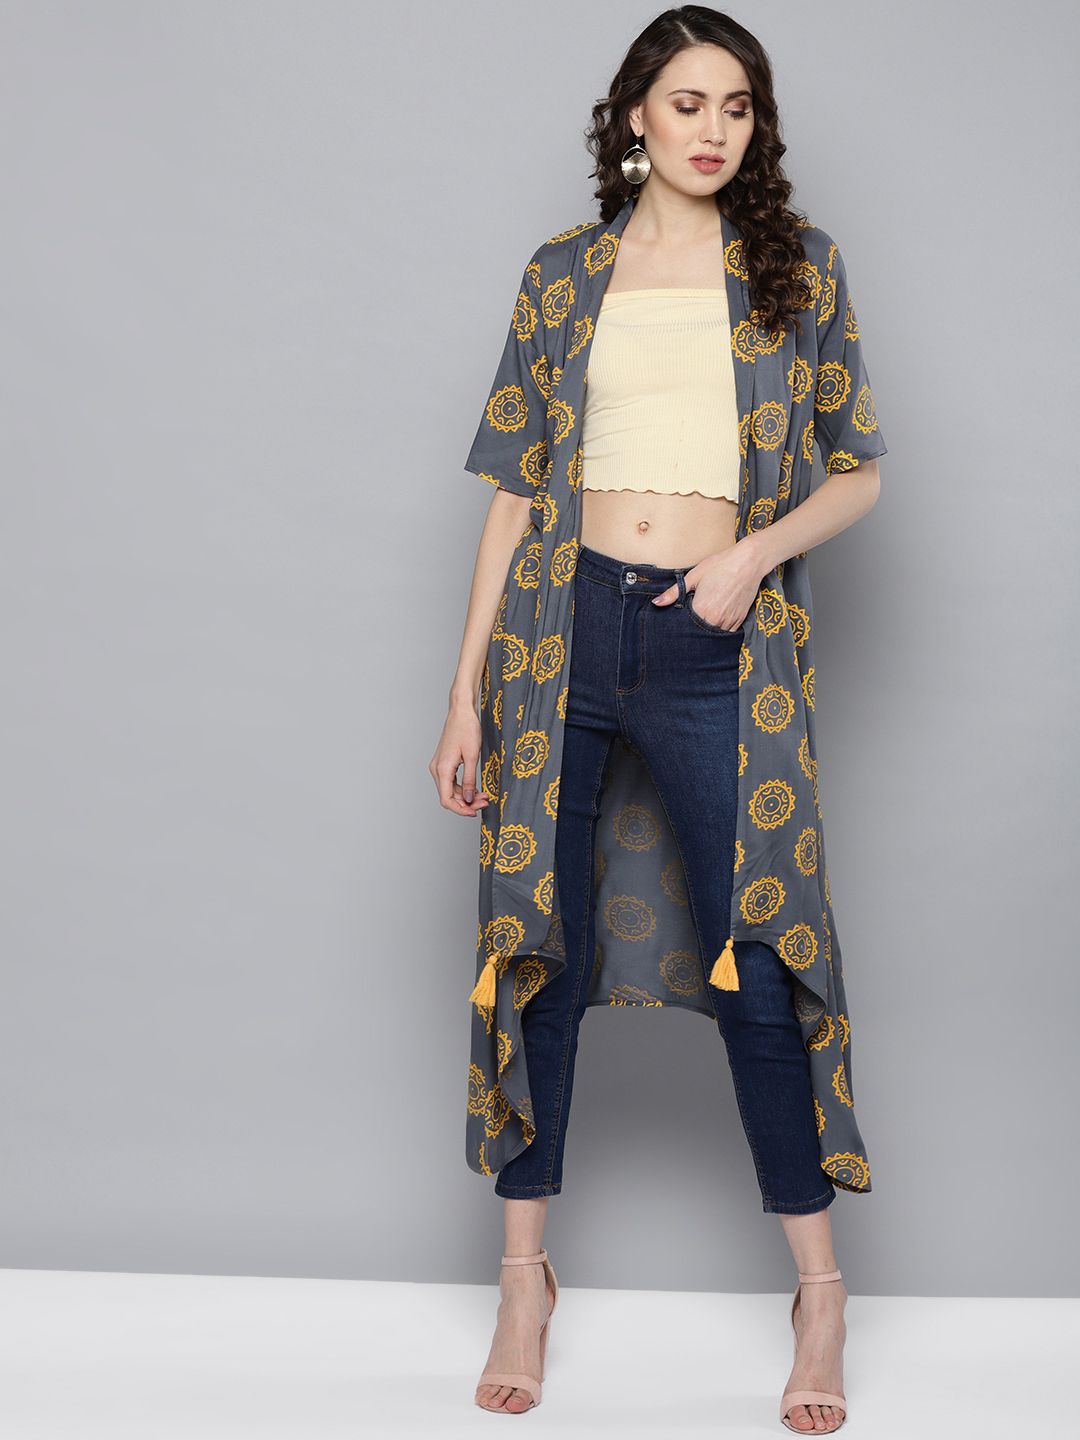 STREET 9 Grey & Yellow Printed Open Front Shrug Price in India